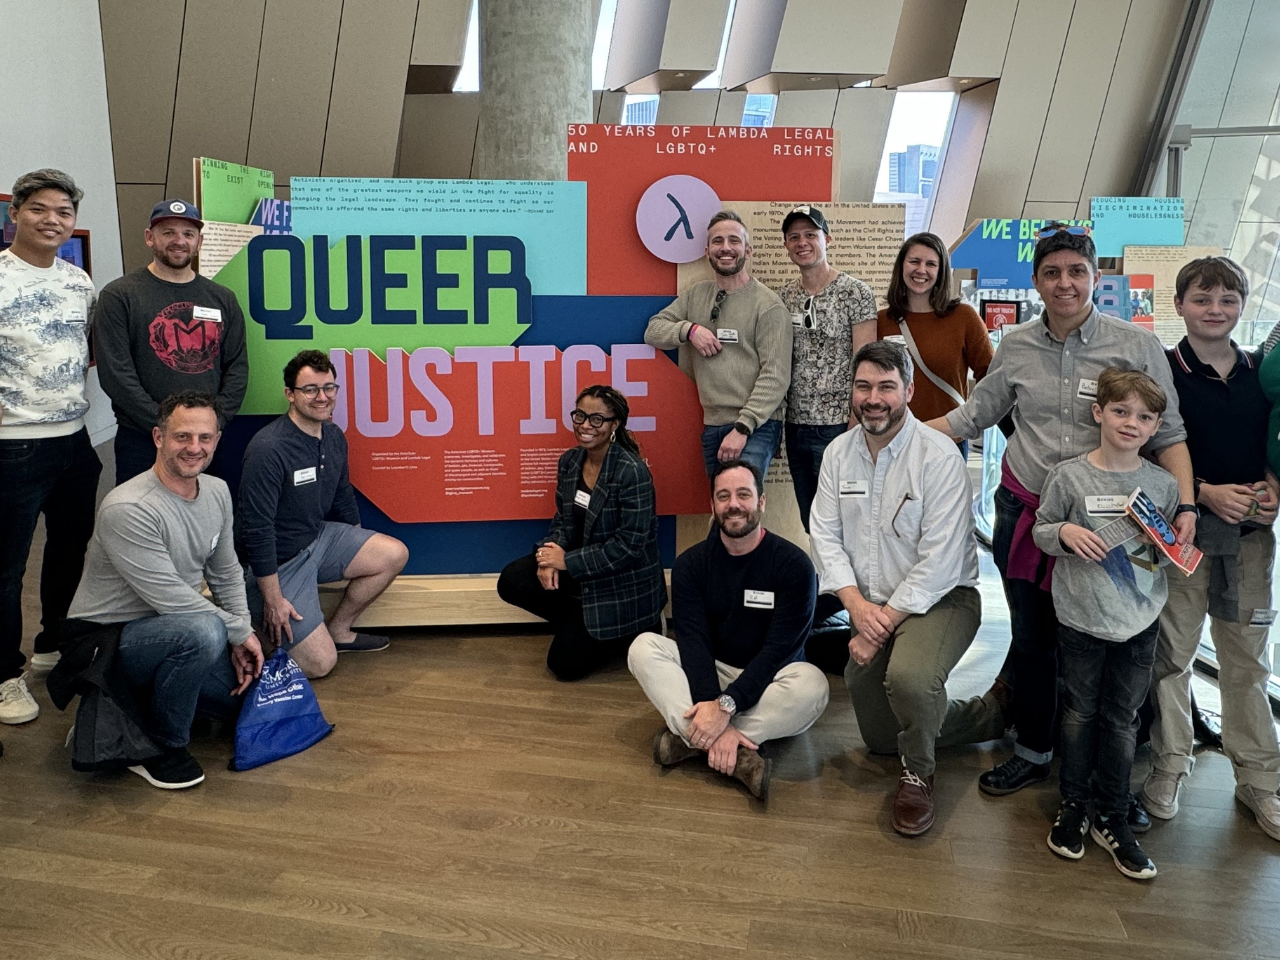 Affinity group stands in front of a Queer Justice museum display